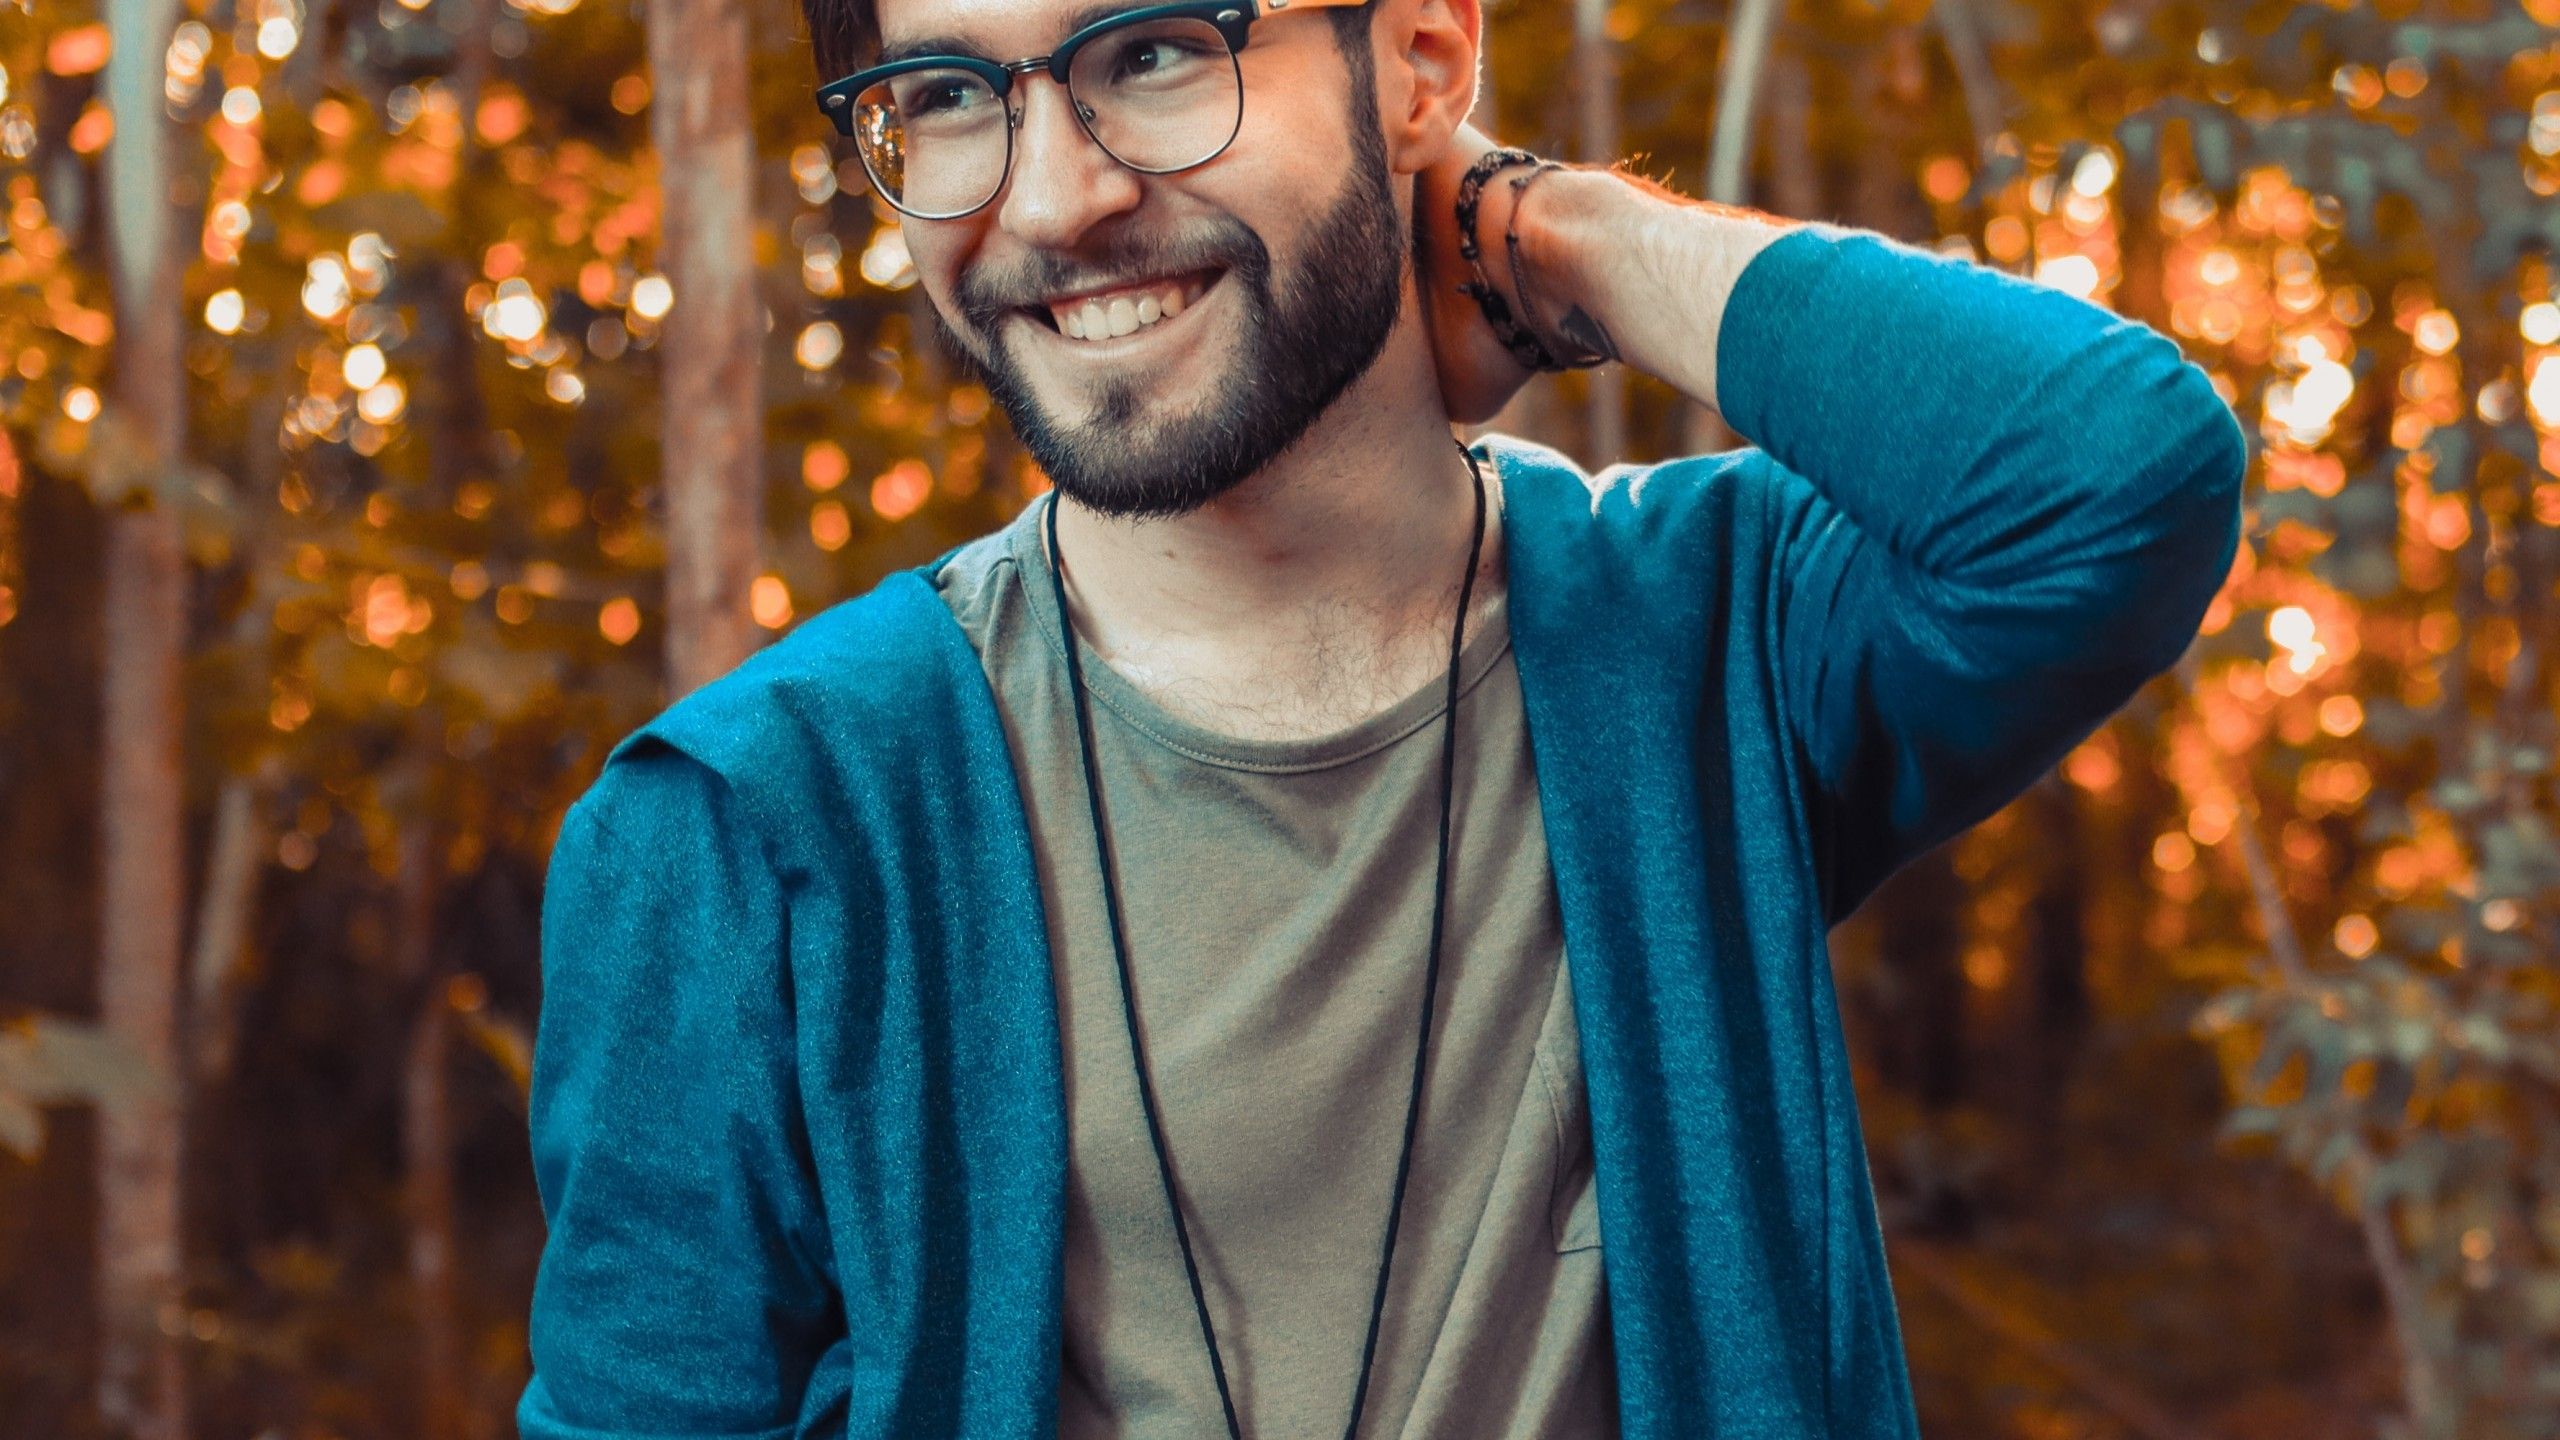 Download 2560x1440 Man, Smiling, Glasses, Necklace, Fashion, Style